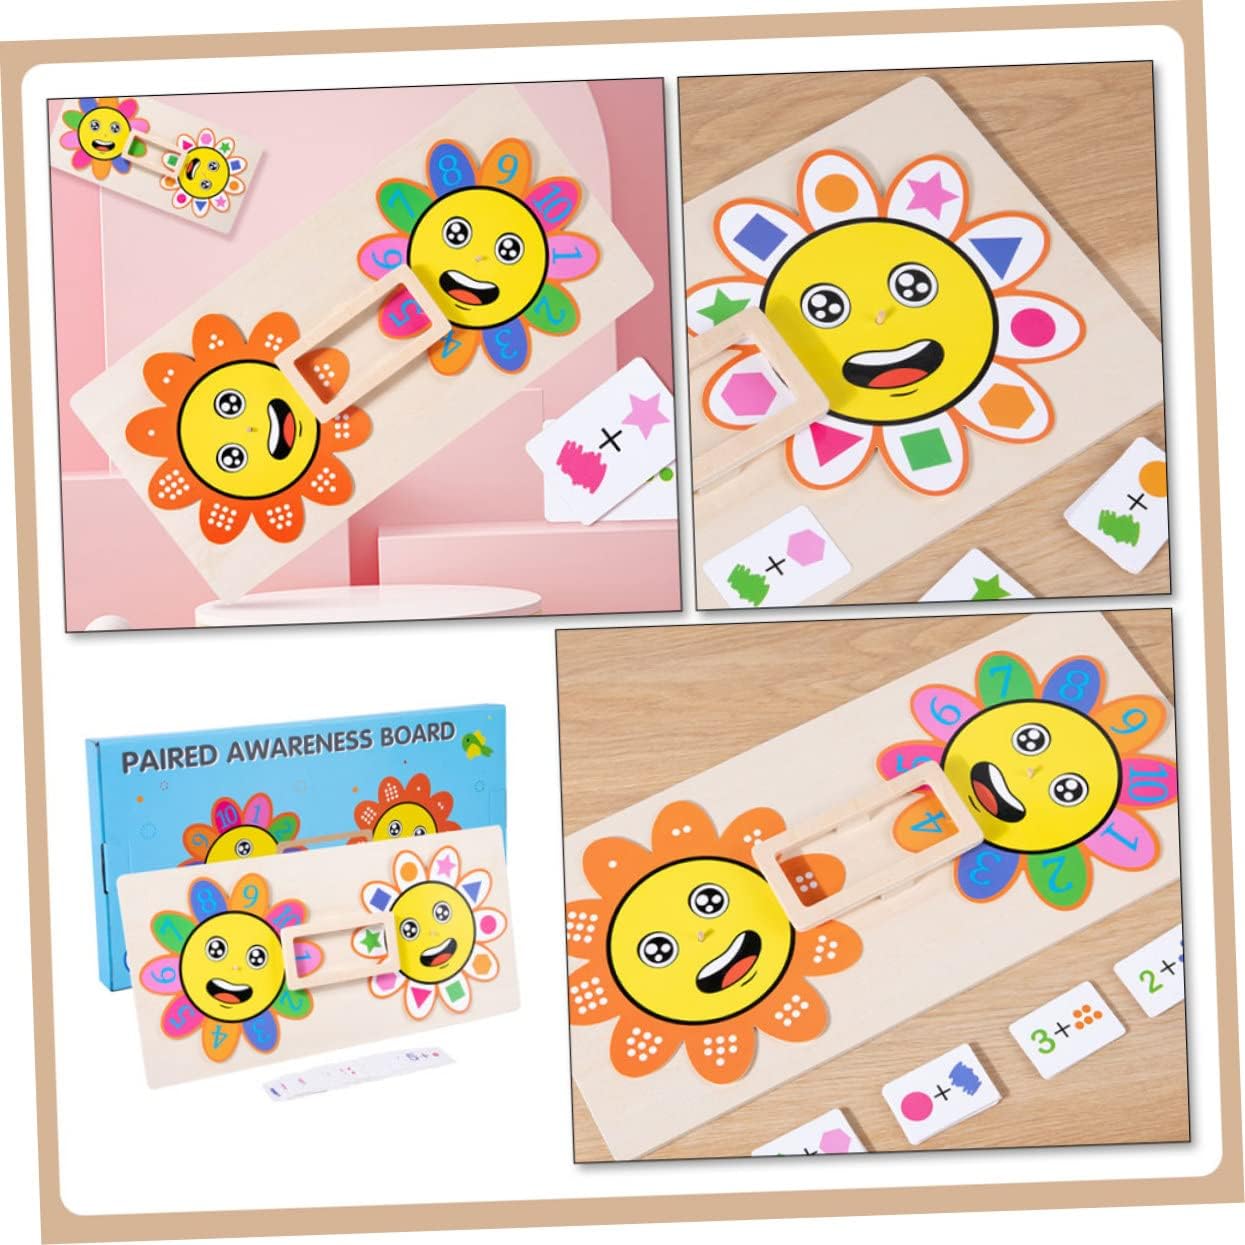 Avalanche Game Wooden Puzzles 1 Set Flower Matching Puzzle Tangram Puzzle Educational Board Toy Puzzles for Kids Child Game Set Wood Three-Dimensional Wooden Toys Wooden Puzzle